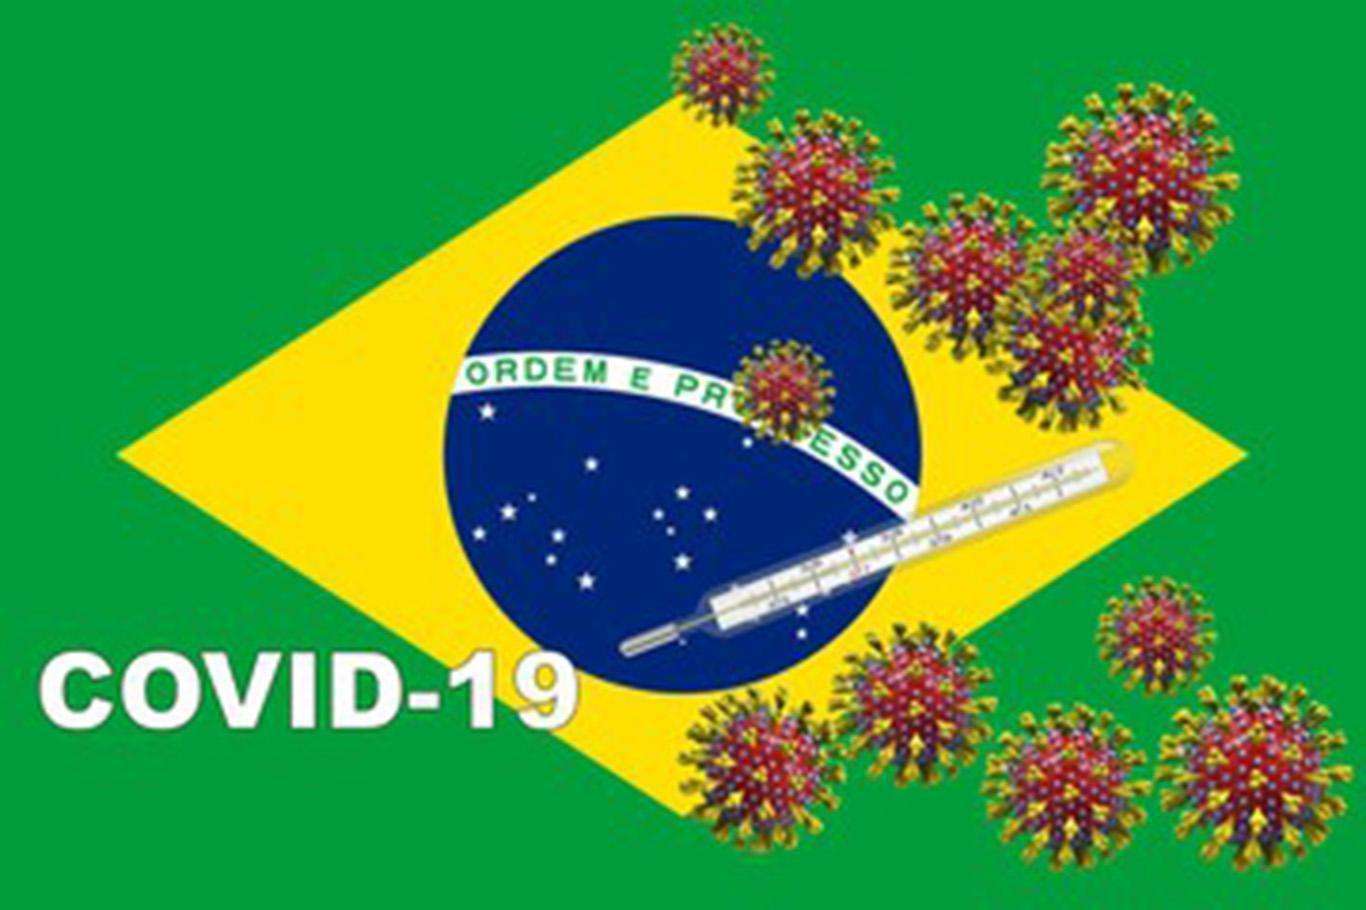 Brazil reports 25,536 daily confirmed cases of COVID-19